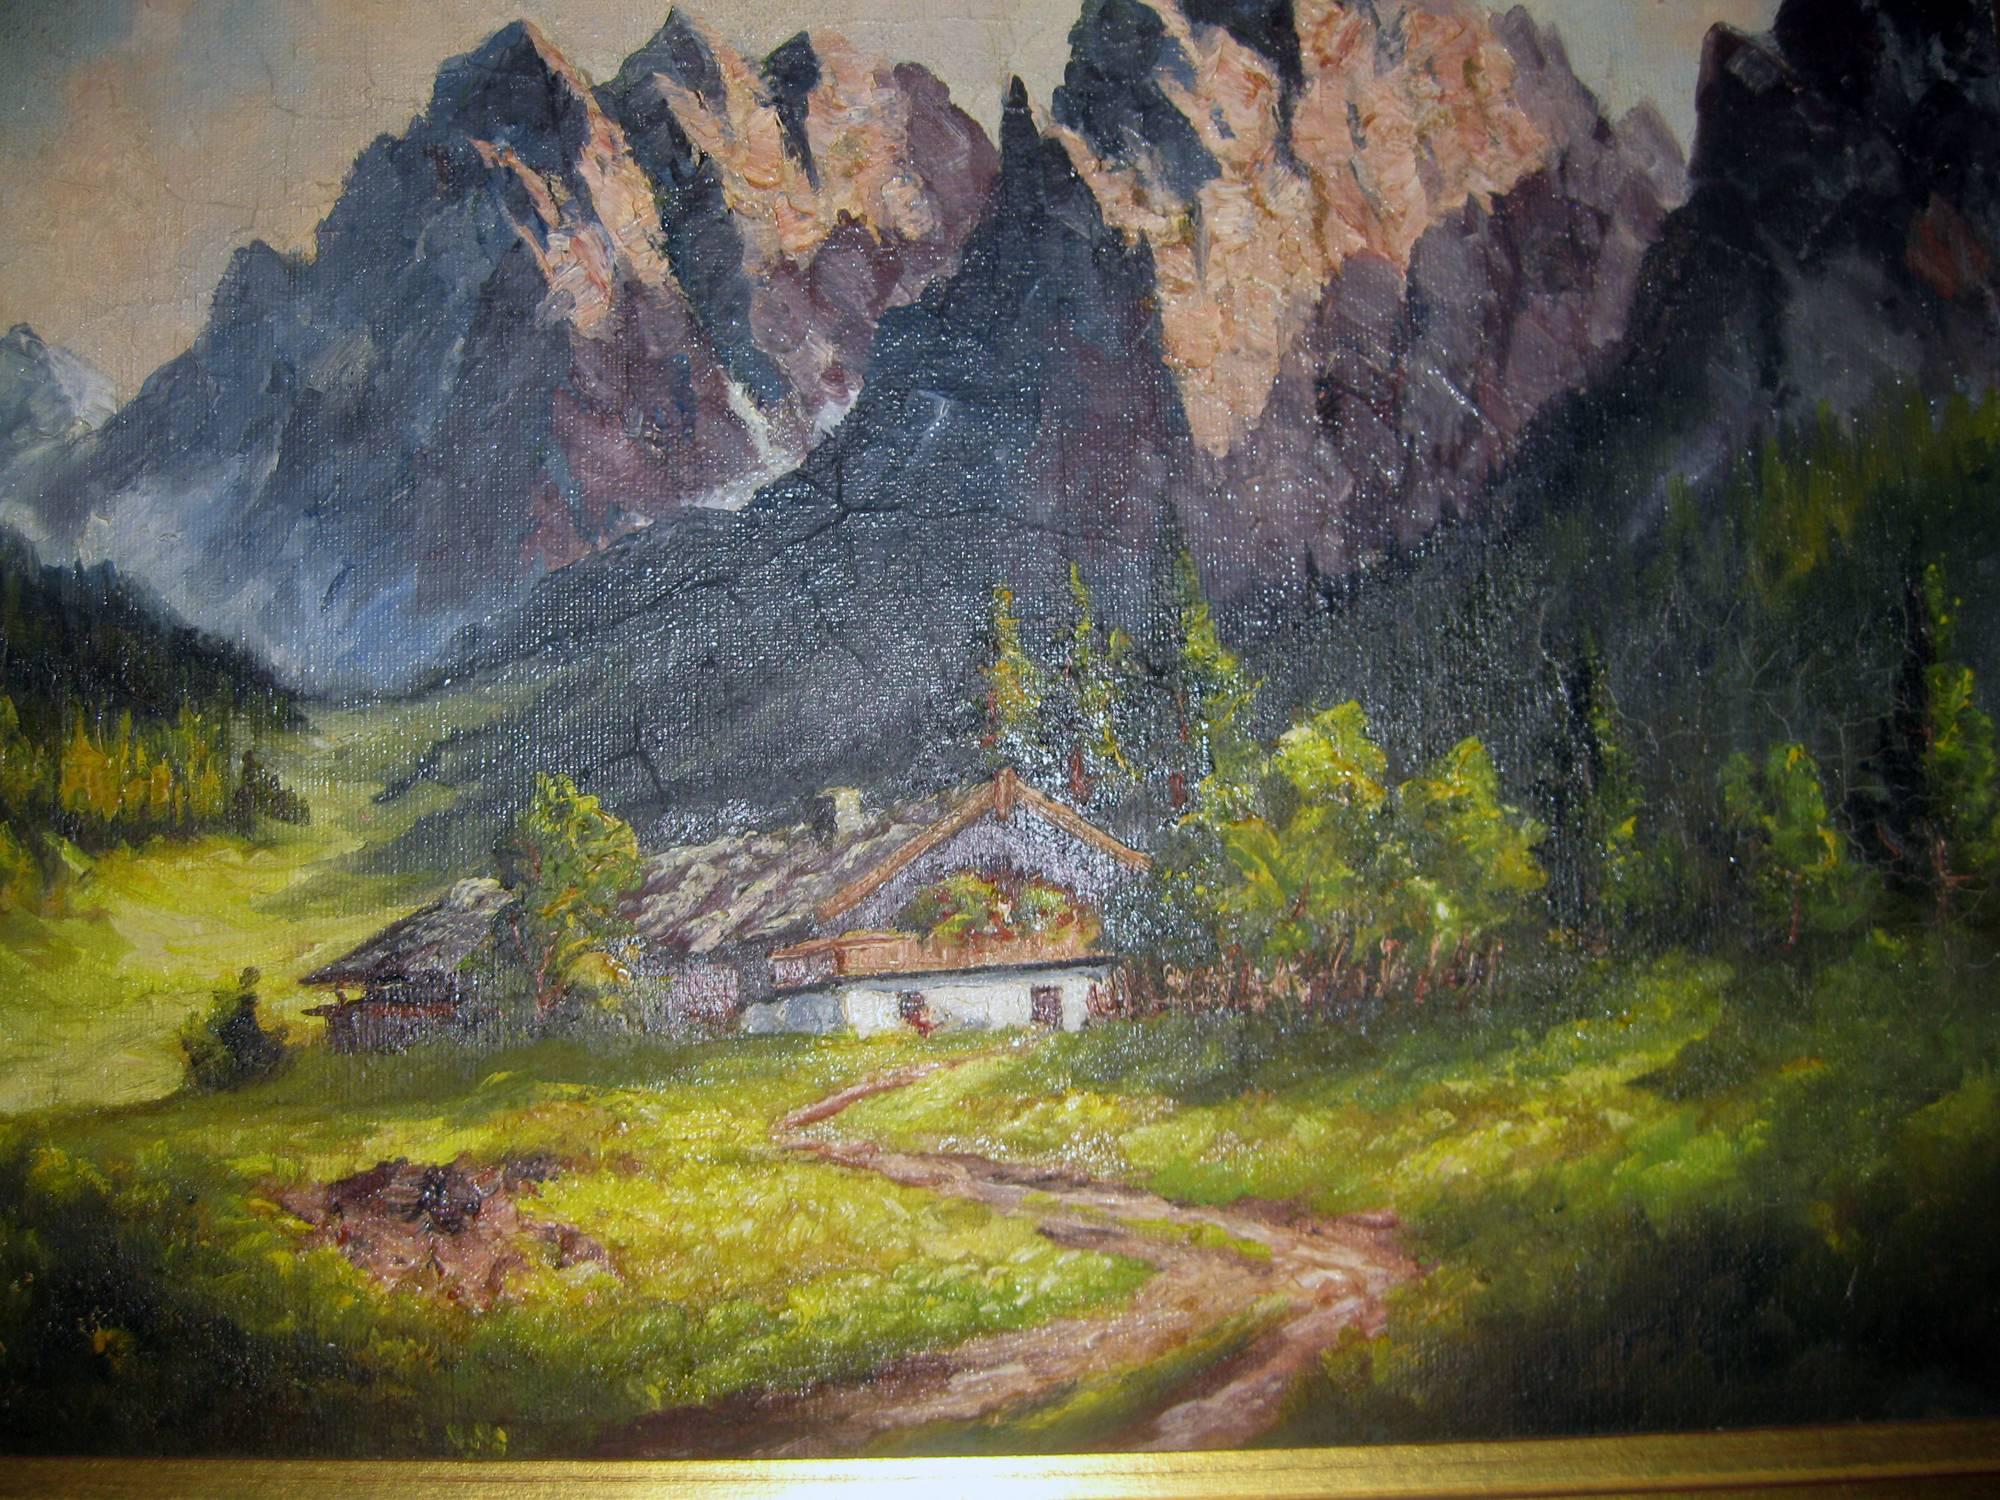 This tranquil fine oil painting depicts a quaint chalet nestled in the Swiss Alps (Seealpsee). Artist signed but it is not legible. Features include nice detail and color. Framed in vintage gilt frame. Measurement includes 2 1/4